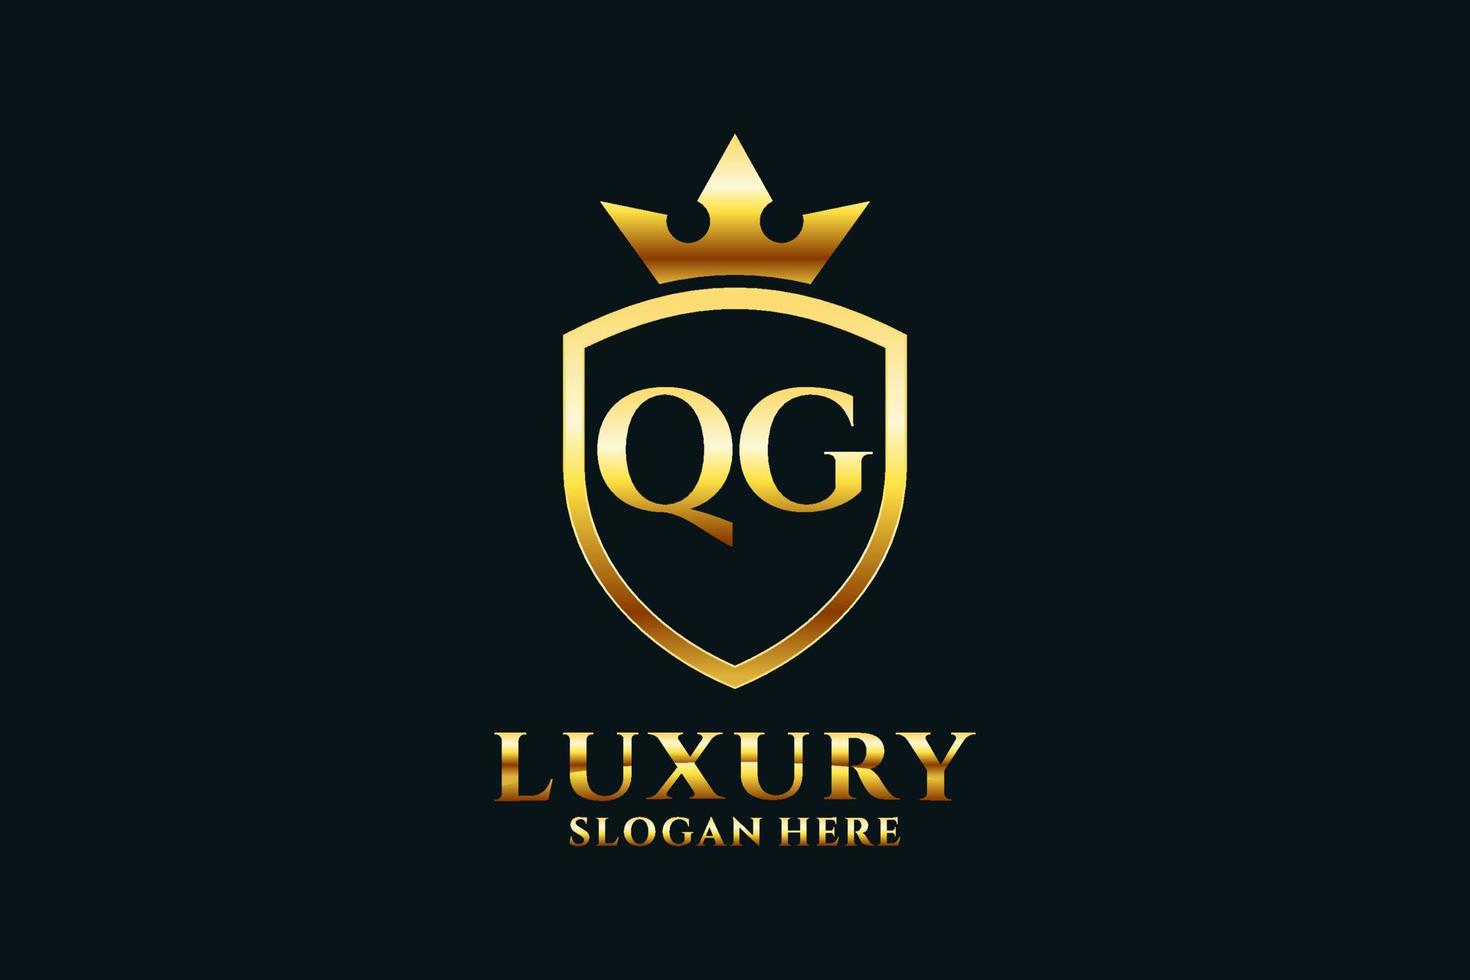 initial QG elegant luxury monogram logo or badge template with scrolls and royal crown - perfect for luxurious branding projects vector